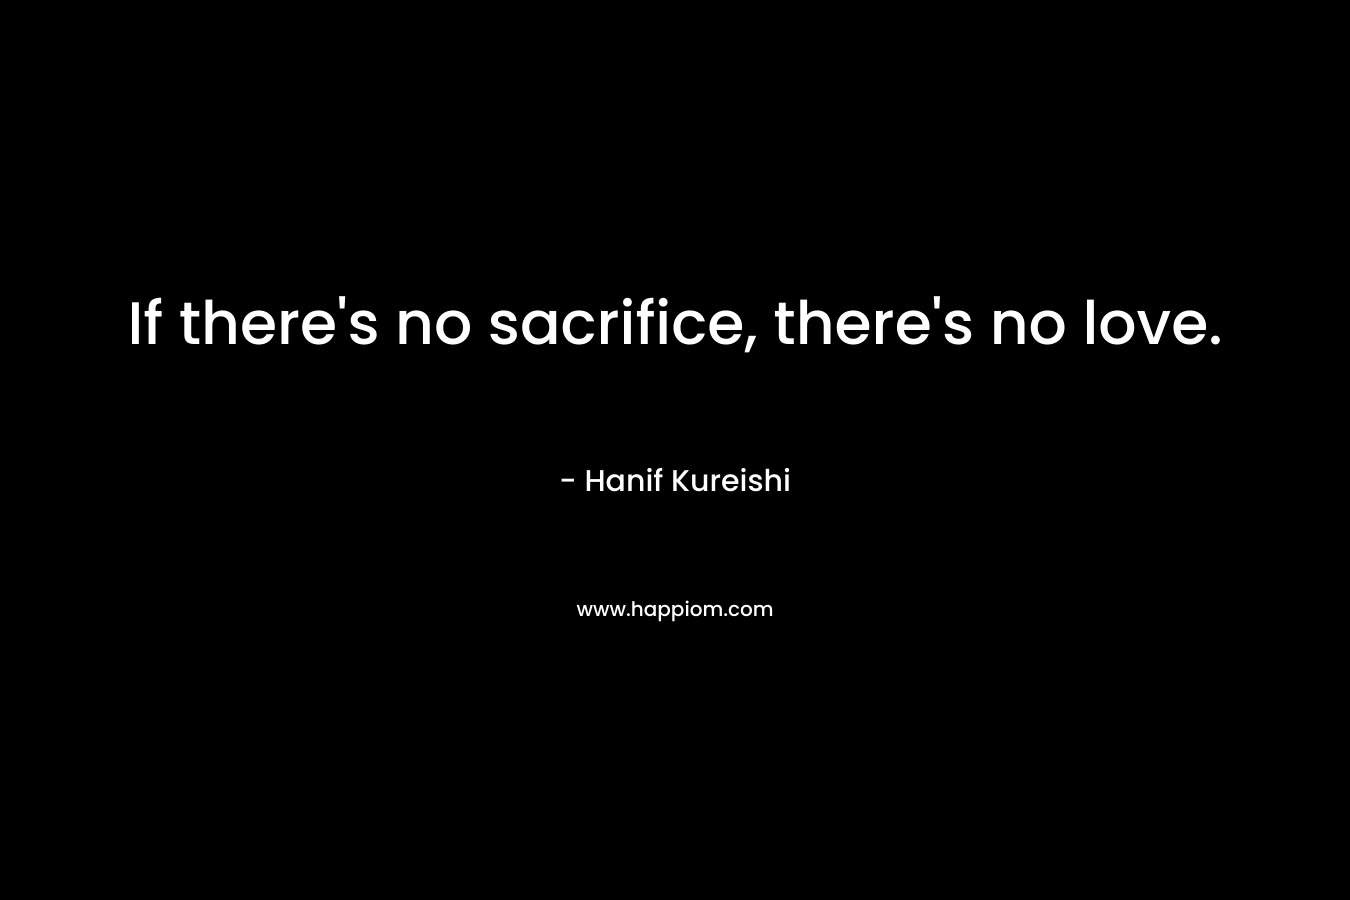 If there's no sacrifice, there's no love.